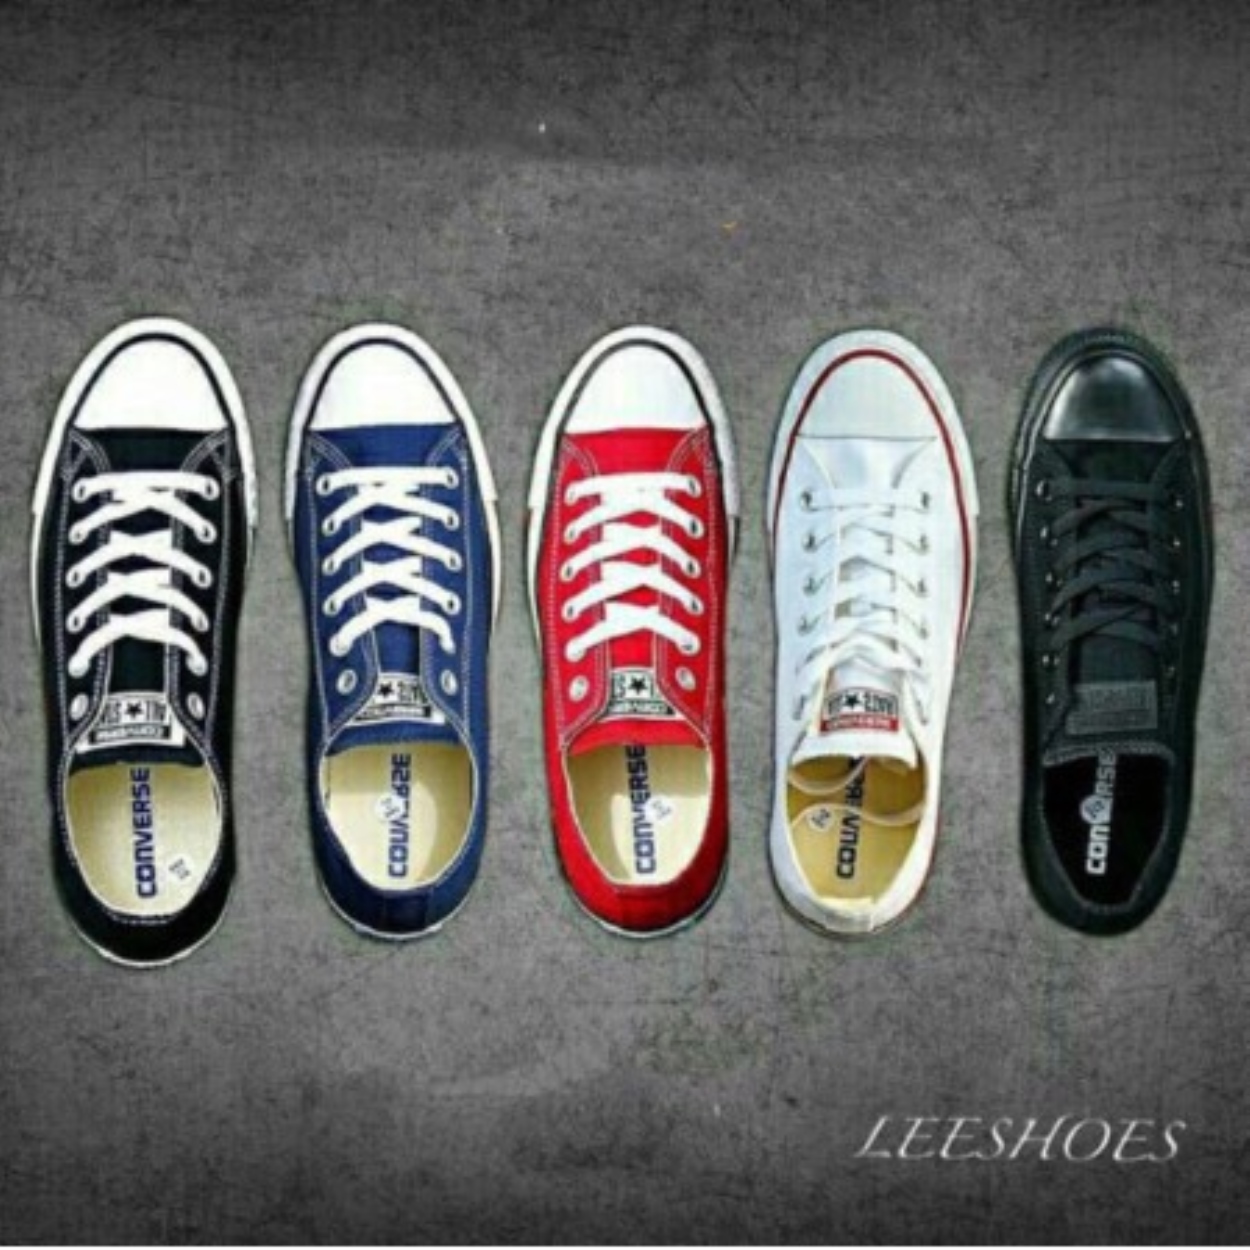 converse all star shoes price in philippines